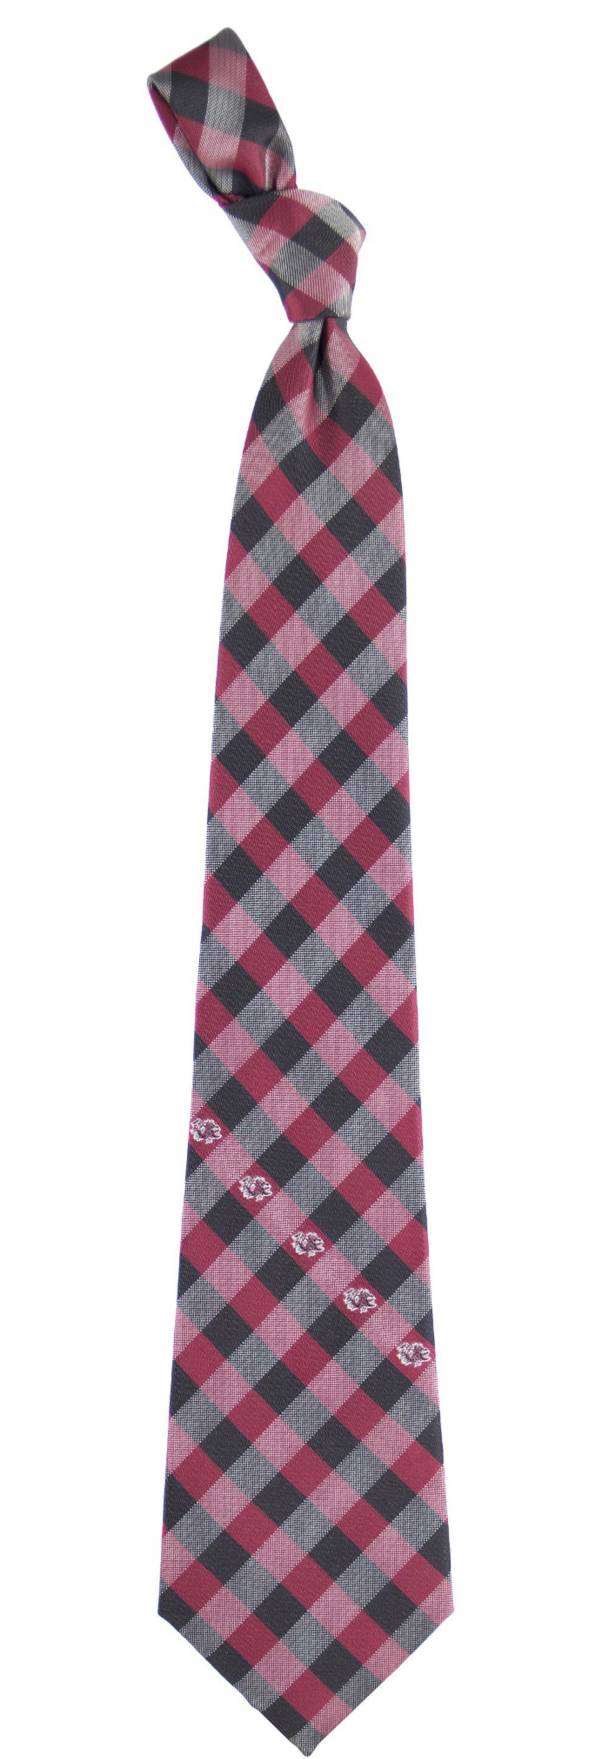 Eagles Wings South Carolina Gamecocks Check Necktie product image